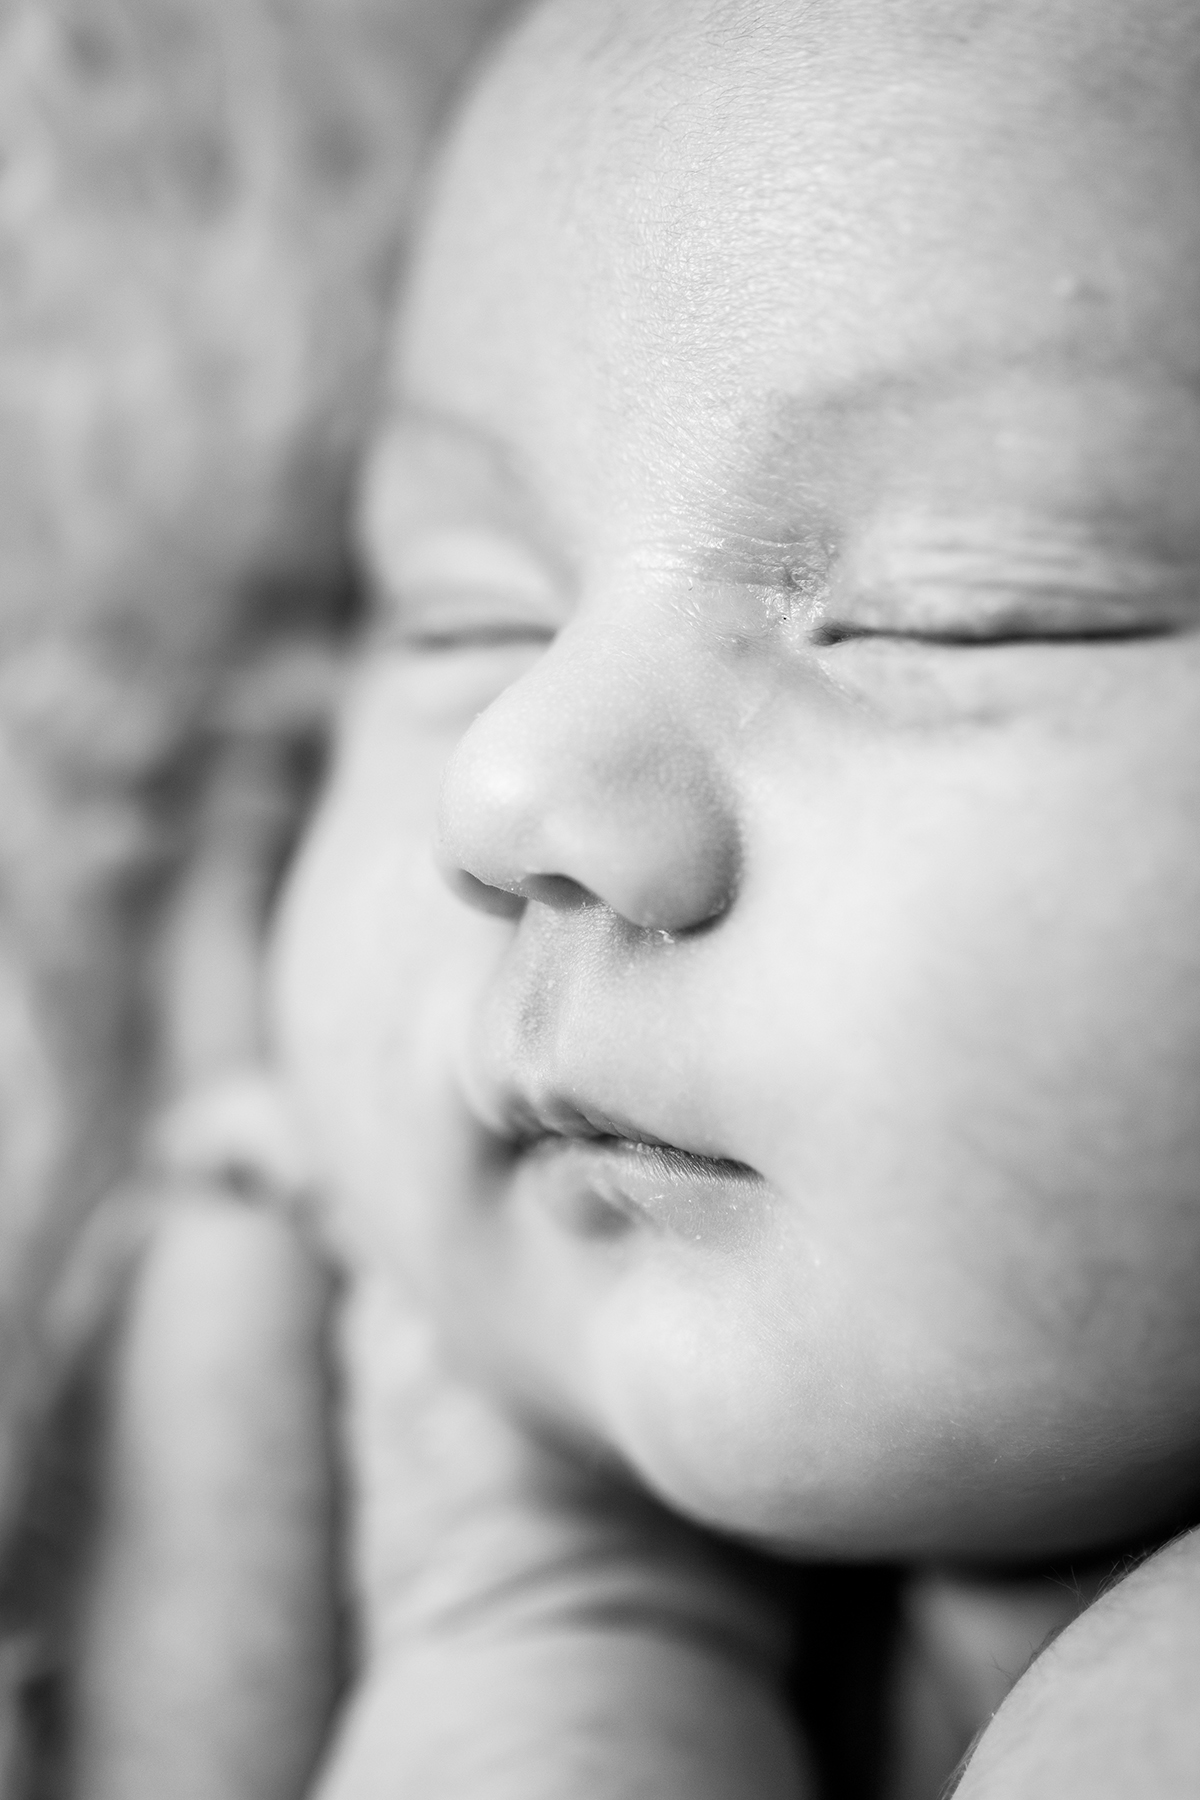 Close up of newborn baby face in BW